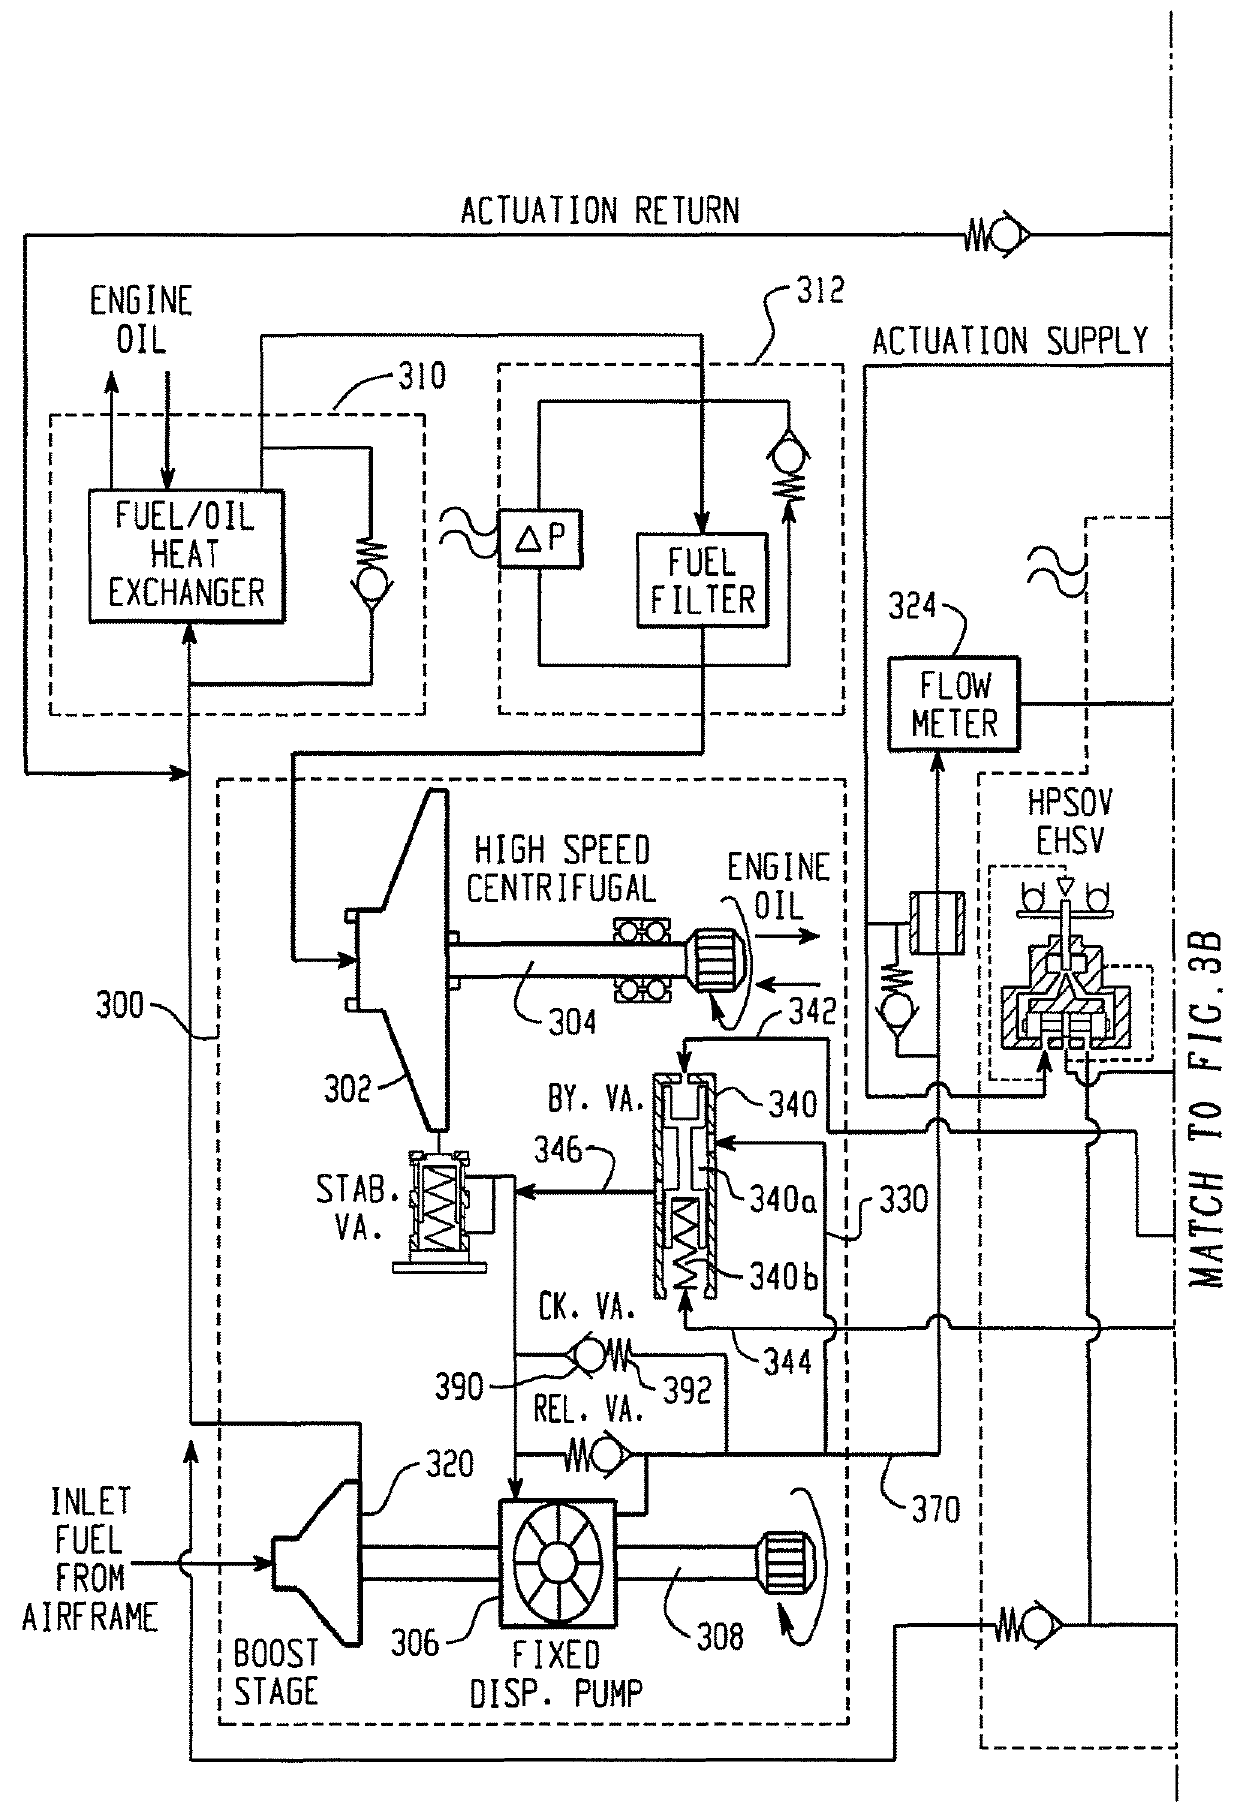 Pressure compensation control of a fixed displacement pump in a pumping and metering system and associated method